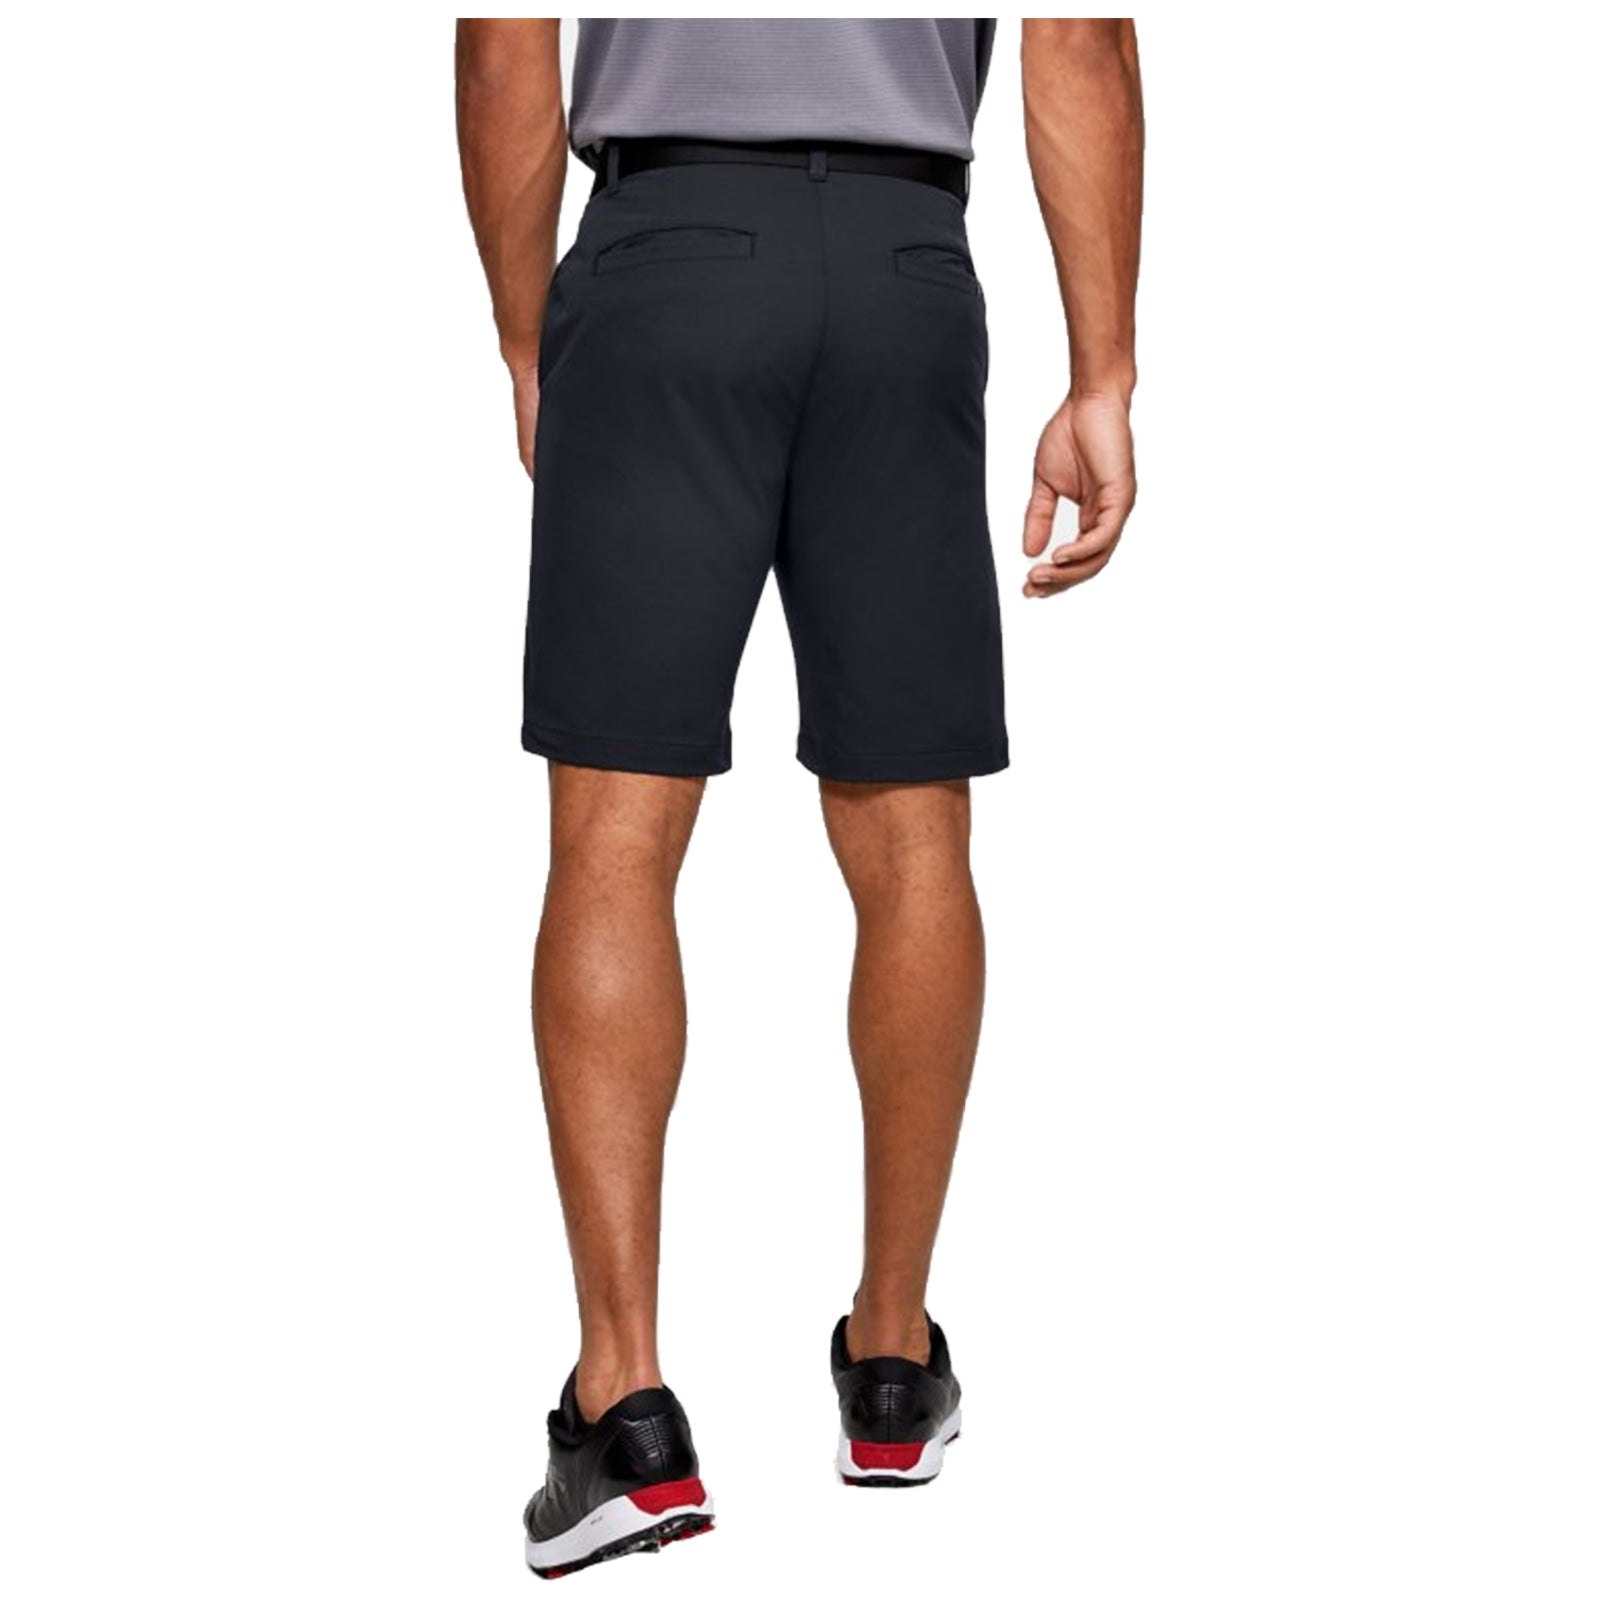 Under Armour Mens Matchplay Shorts